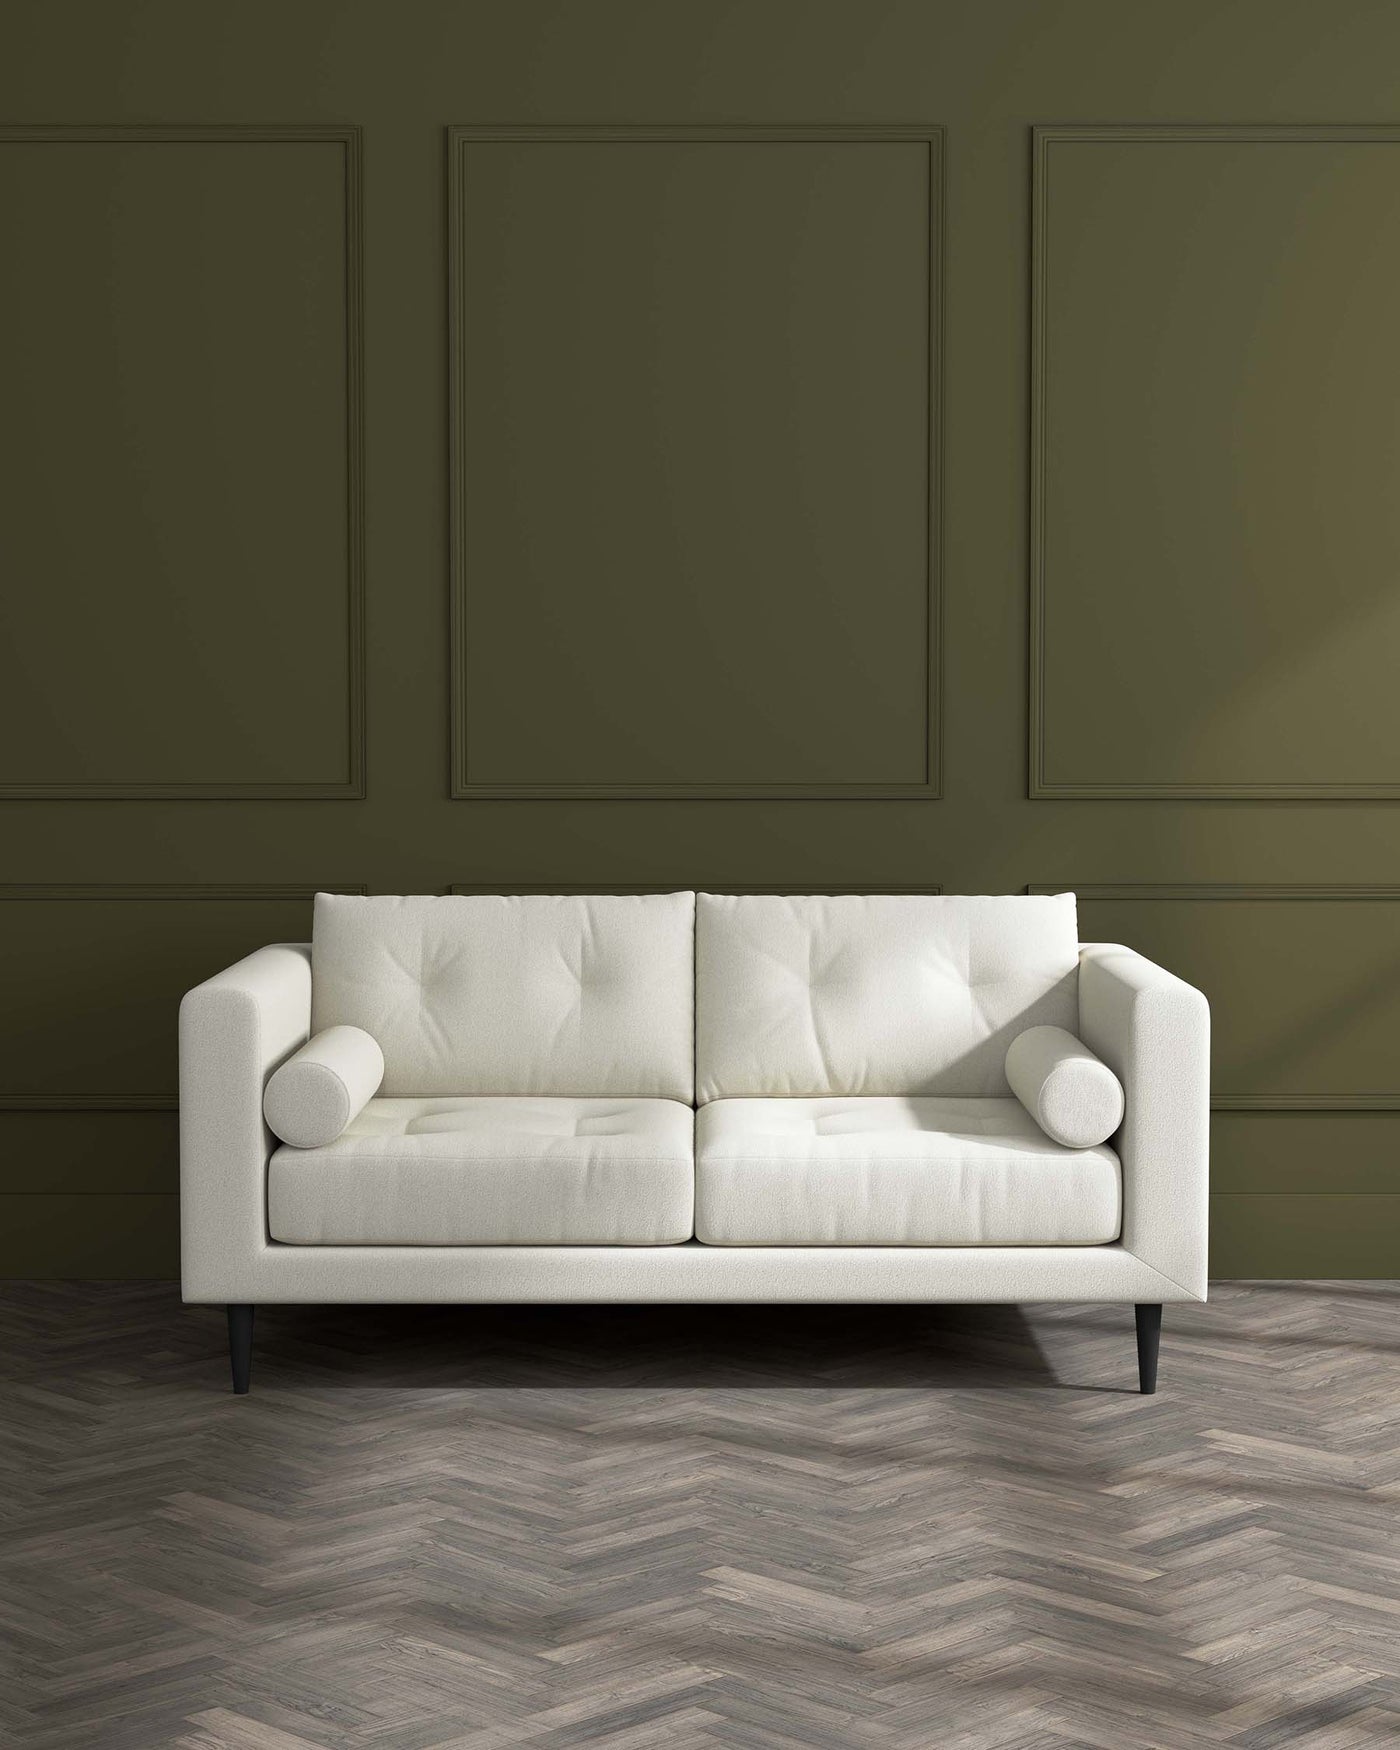 A modern light beige three-seater sofa with tufted back cushions, fitted with cylindrical side cushions and supported by dark wooden tapered legs against a dark olive green wall panel background.